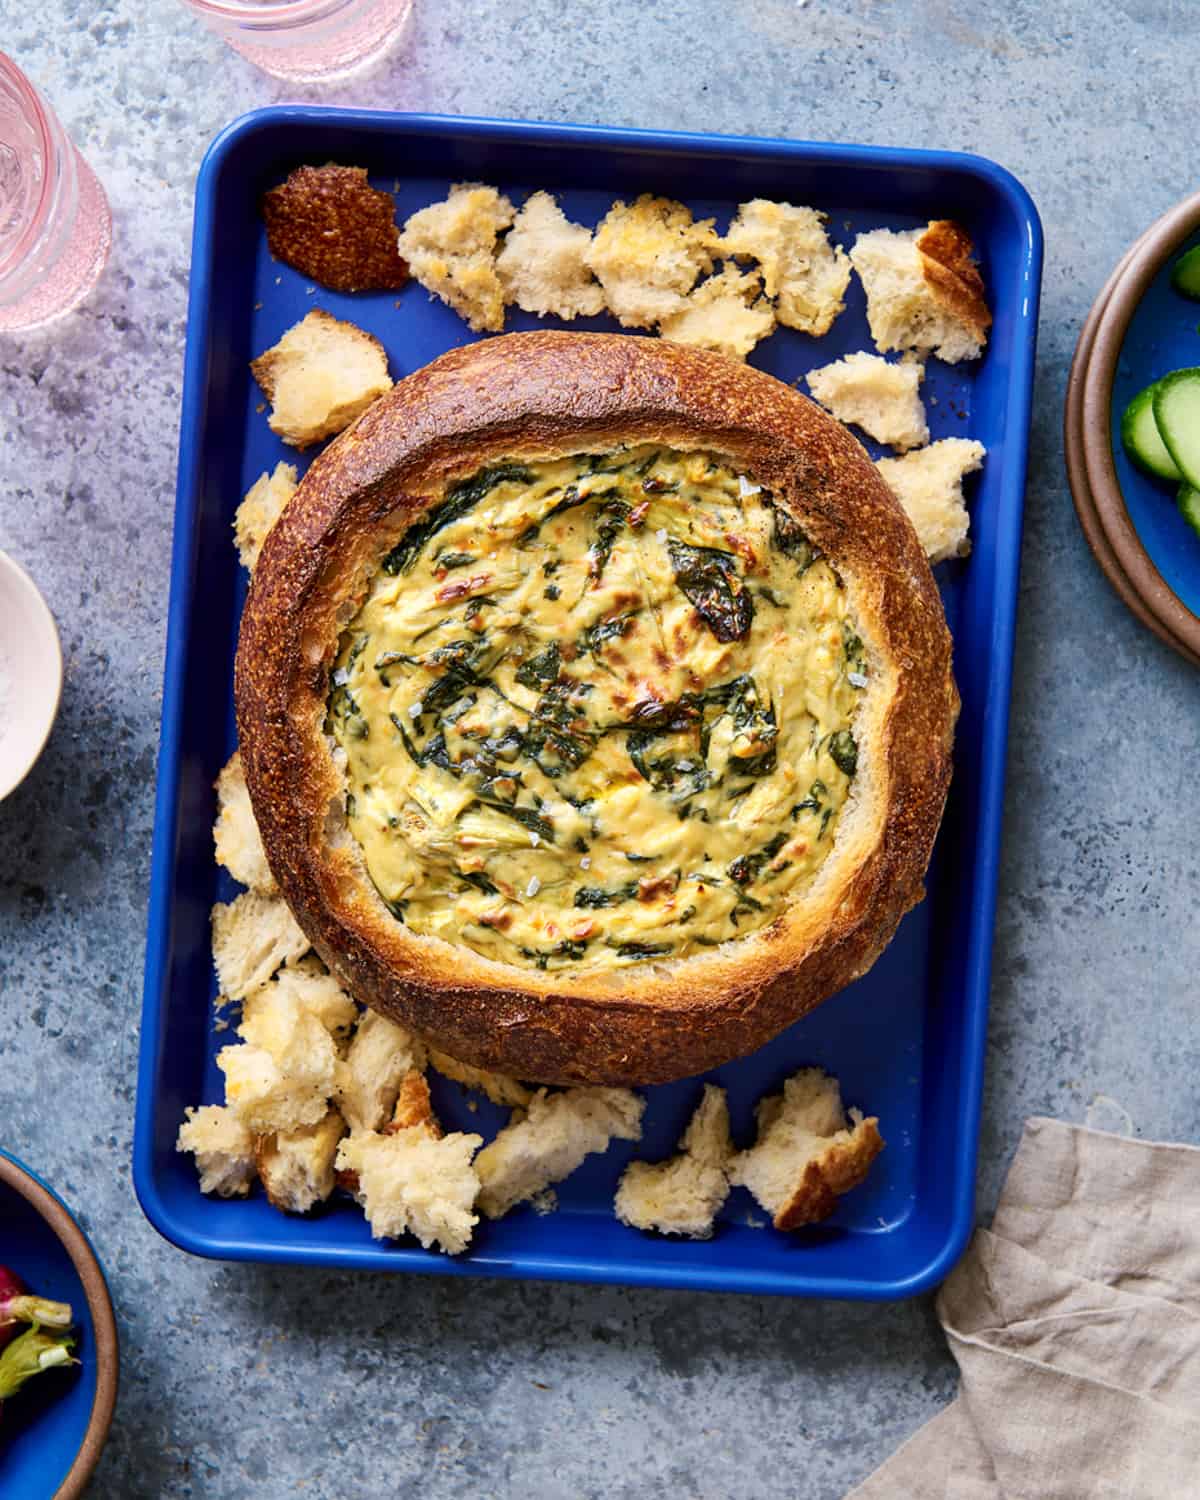 vegan spinach artichoke dip in bread bowl next to cooked bread pieces on a blue sheet pan.